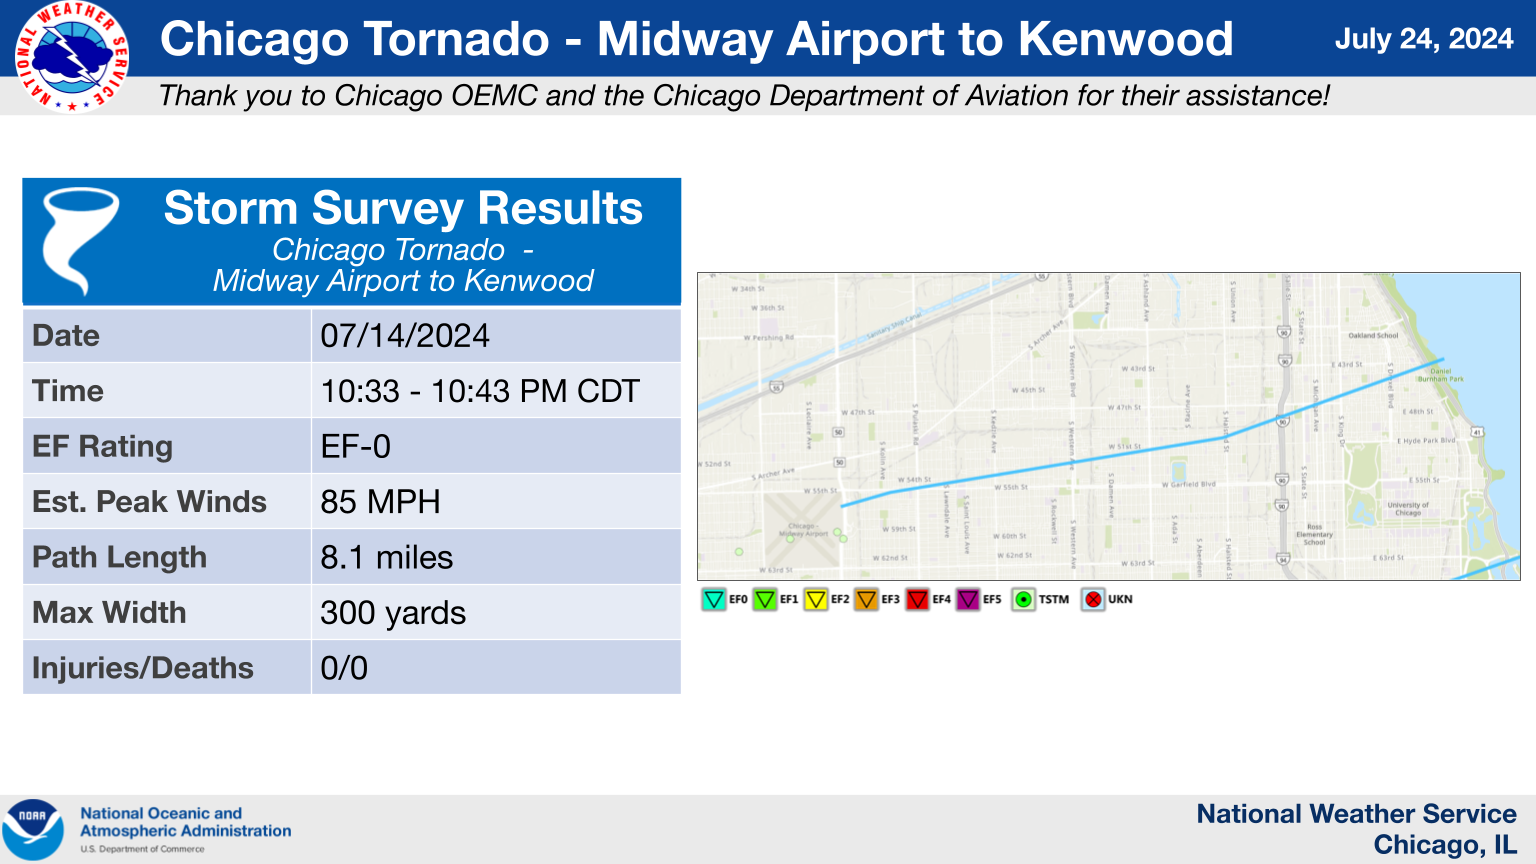 Midway Airport to Kenwood Tornado Summary Graphic